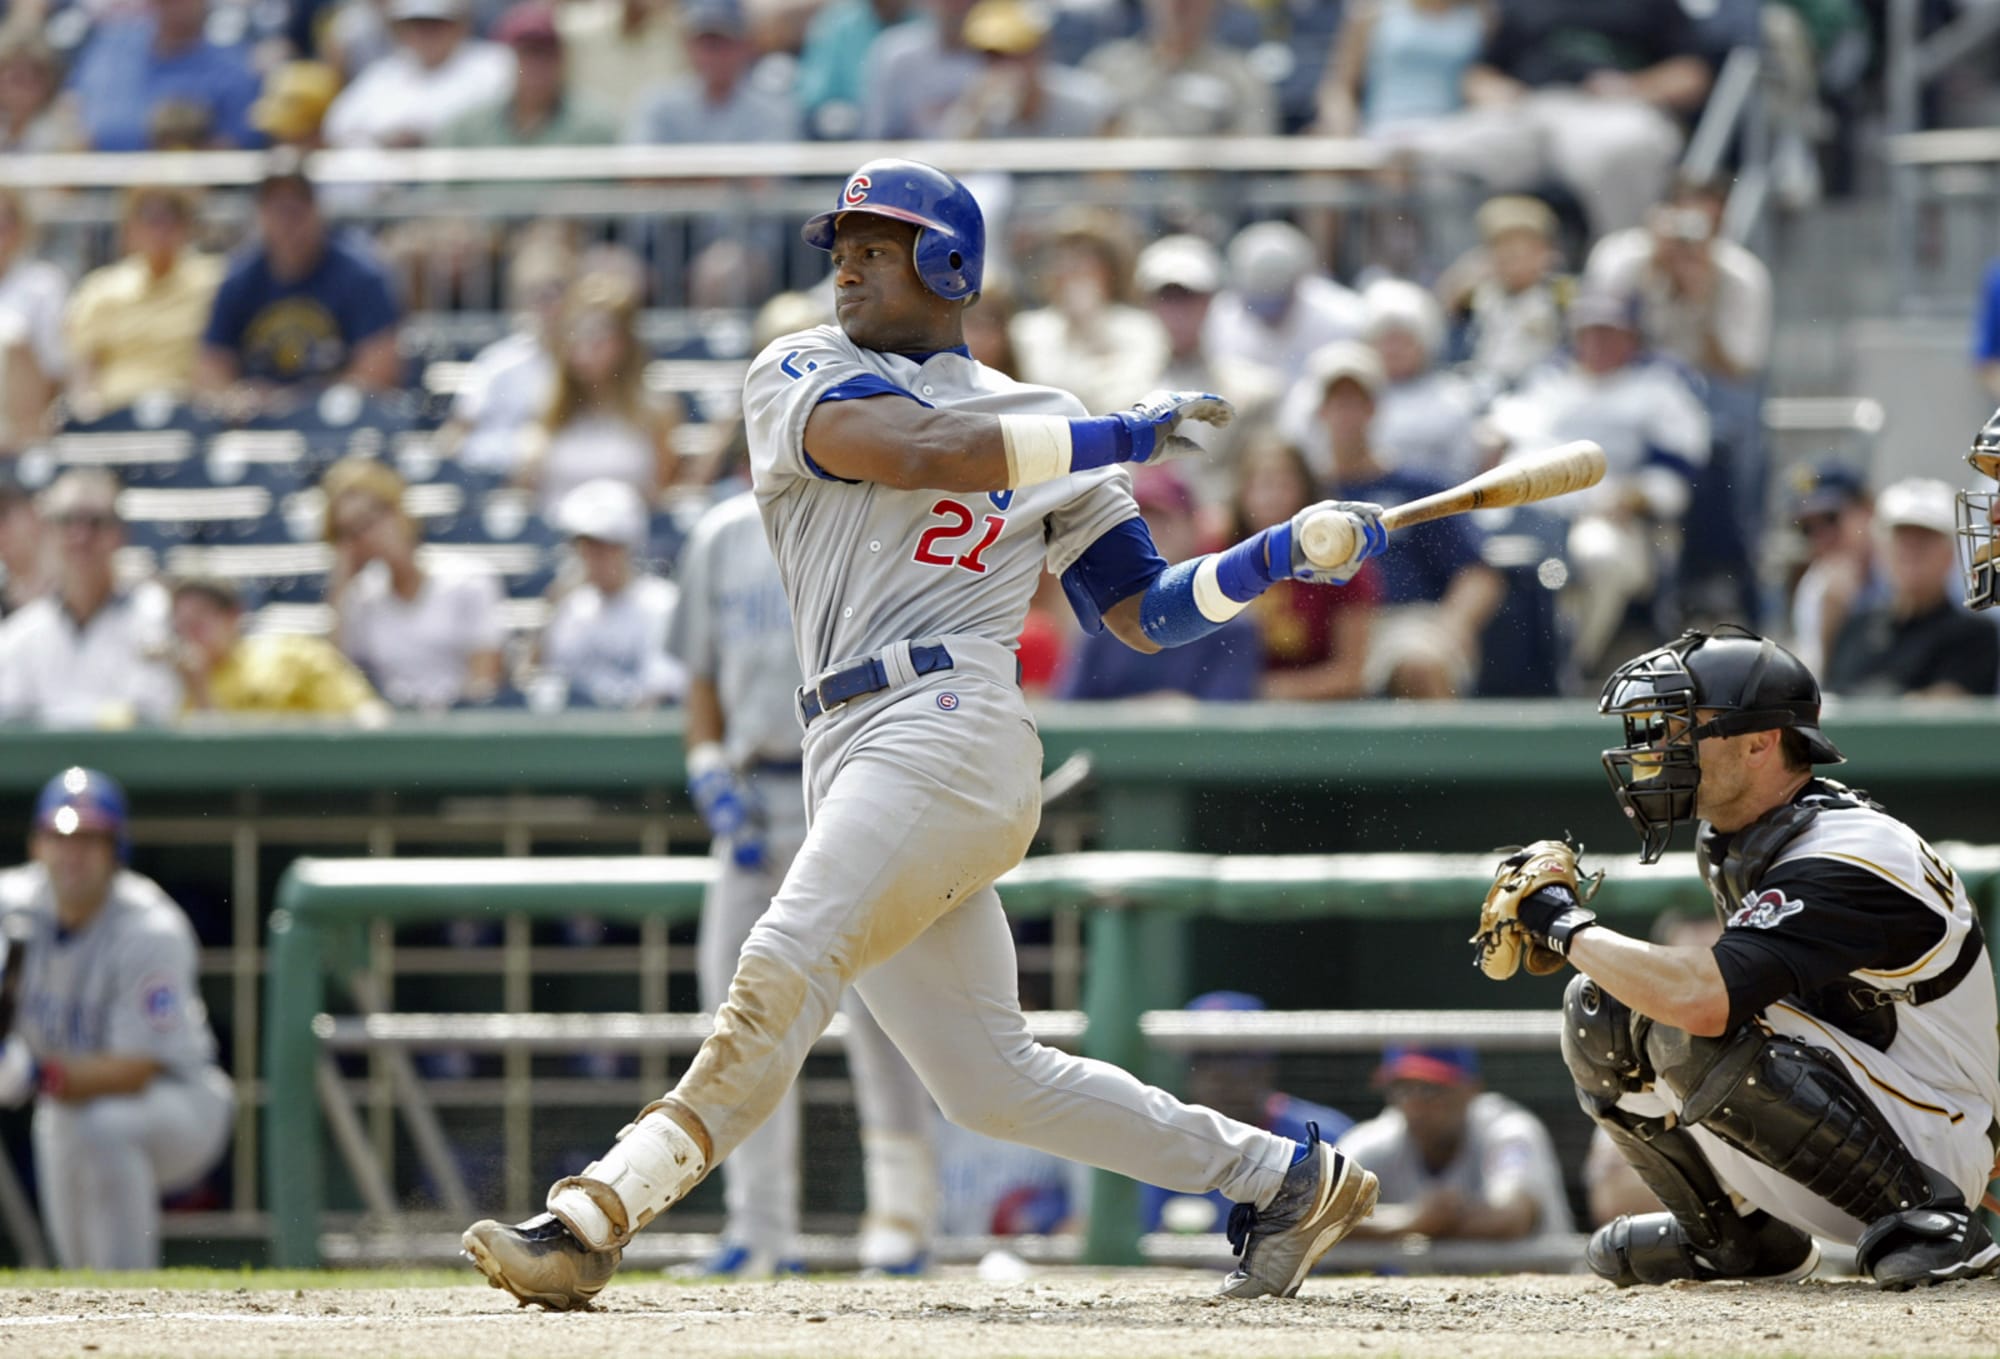 Sammy Sosa wants his number retired by the Cubs